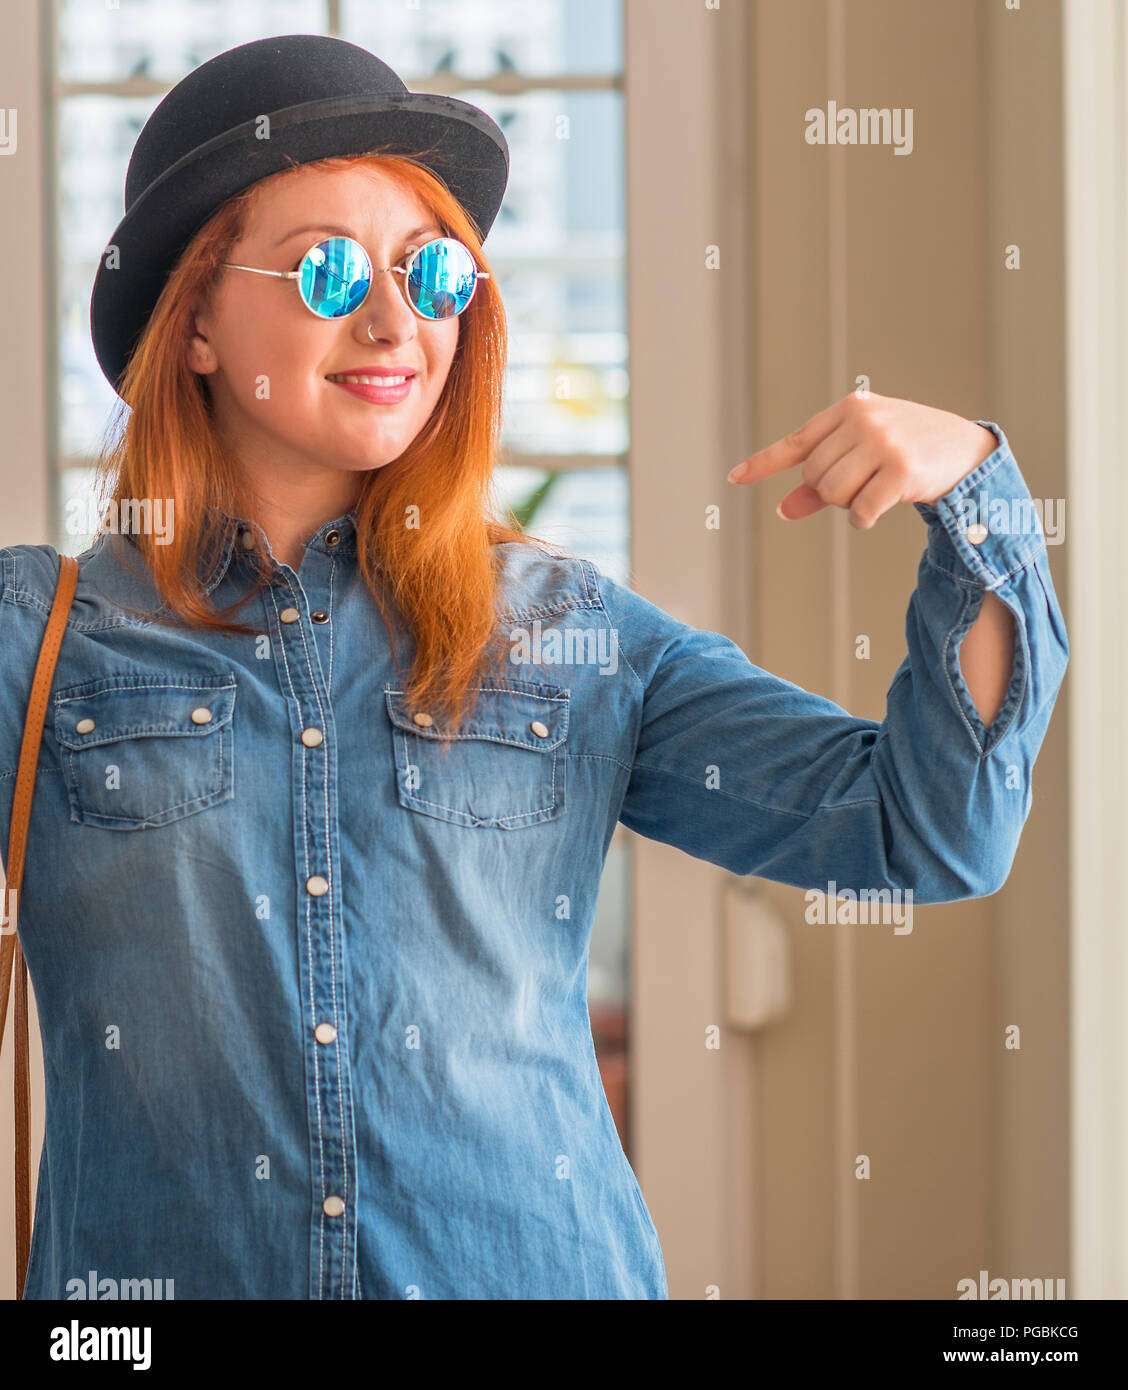 Stylish redhead woman wearing bowler hat and sunglasses looking confident with smile on face, pointing oneself with fingers proud and happy. Stock Photo